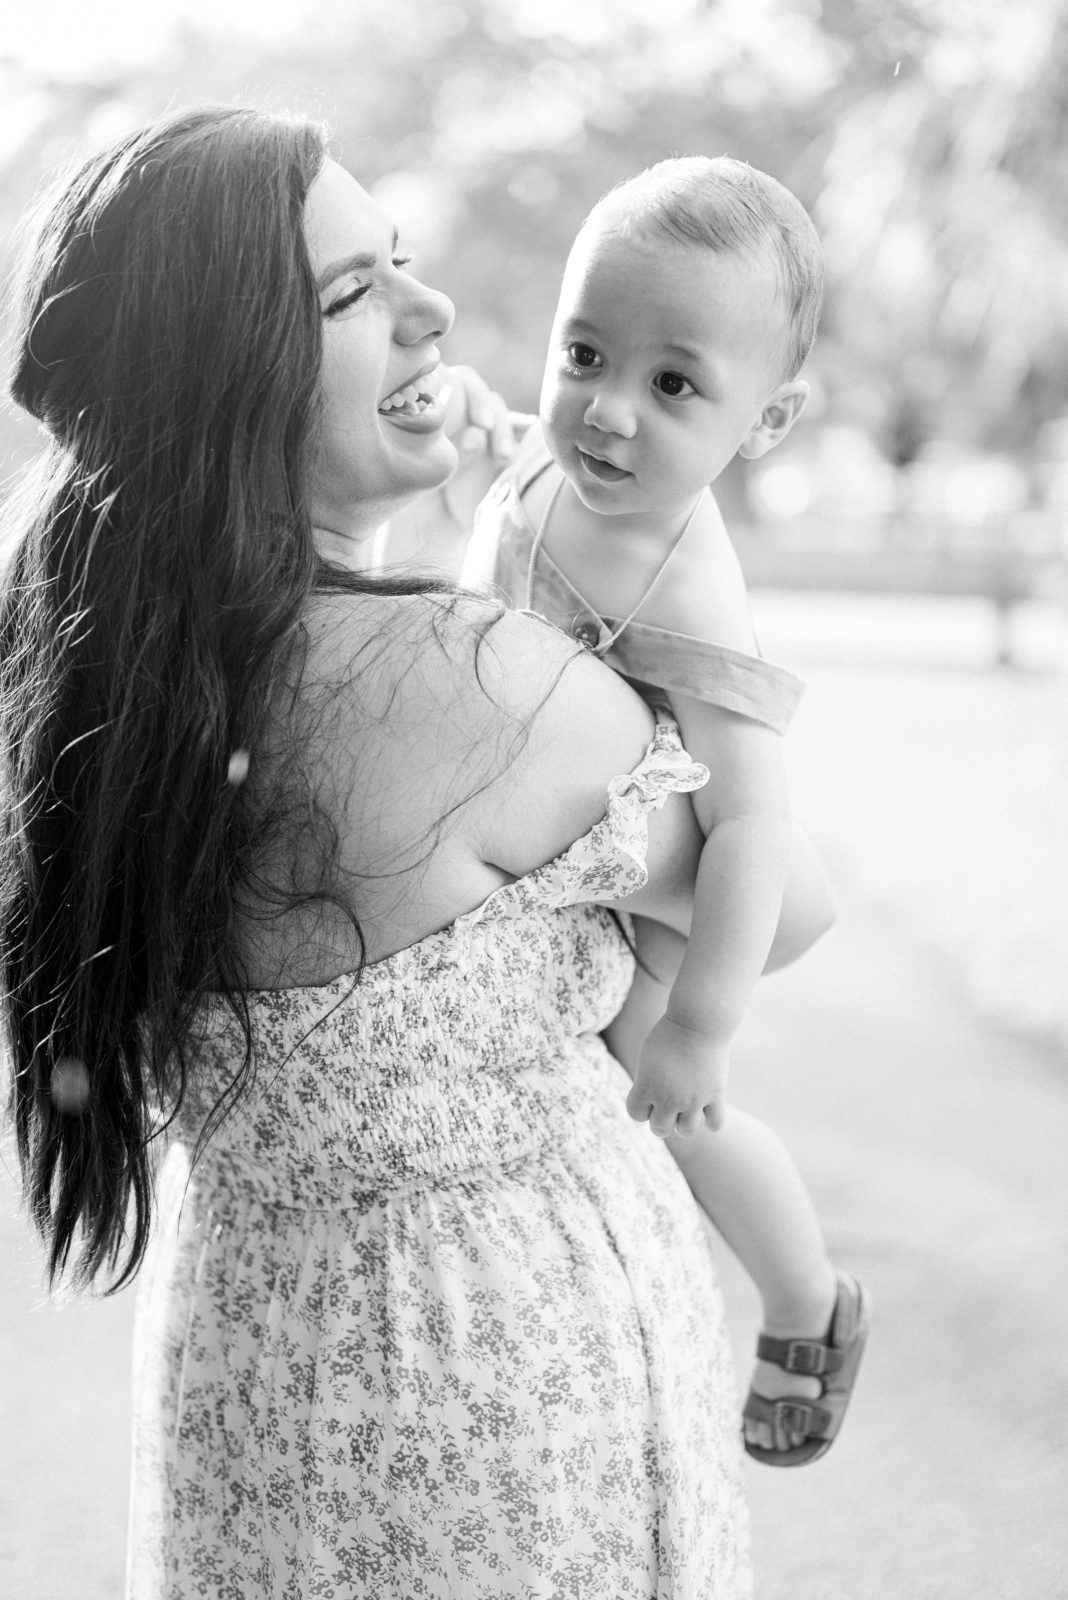 Beautiful black and white portrait of mom and her baby